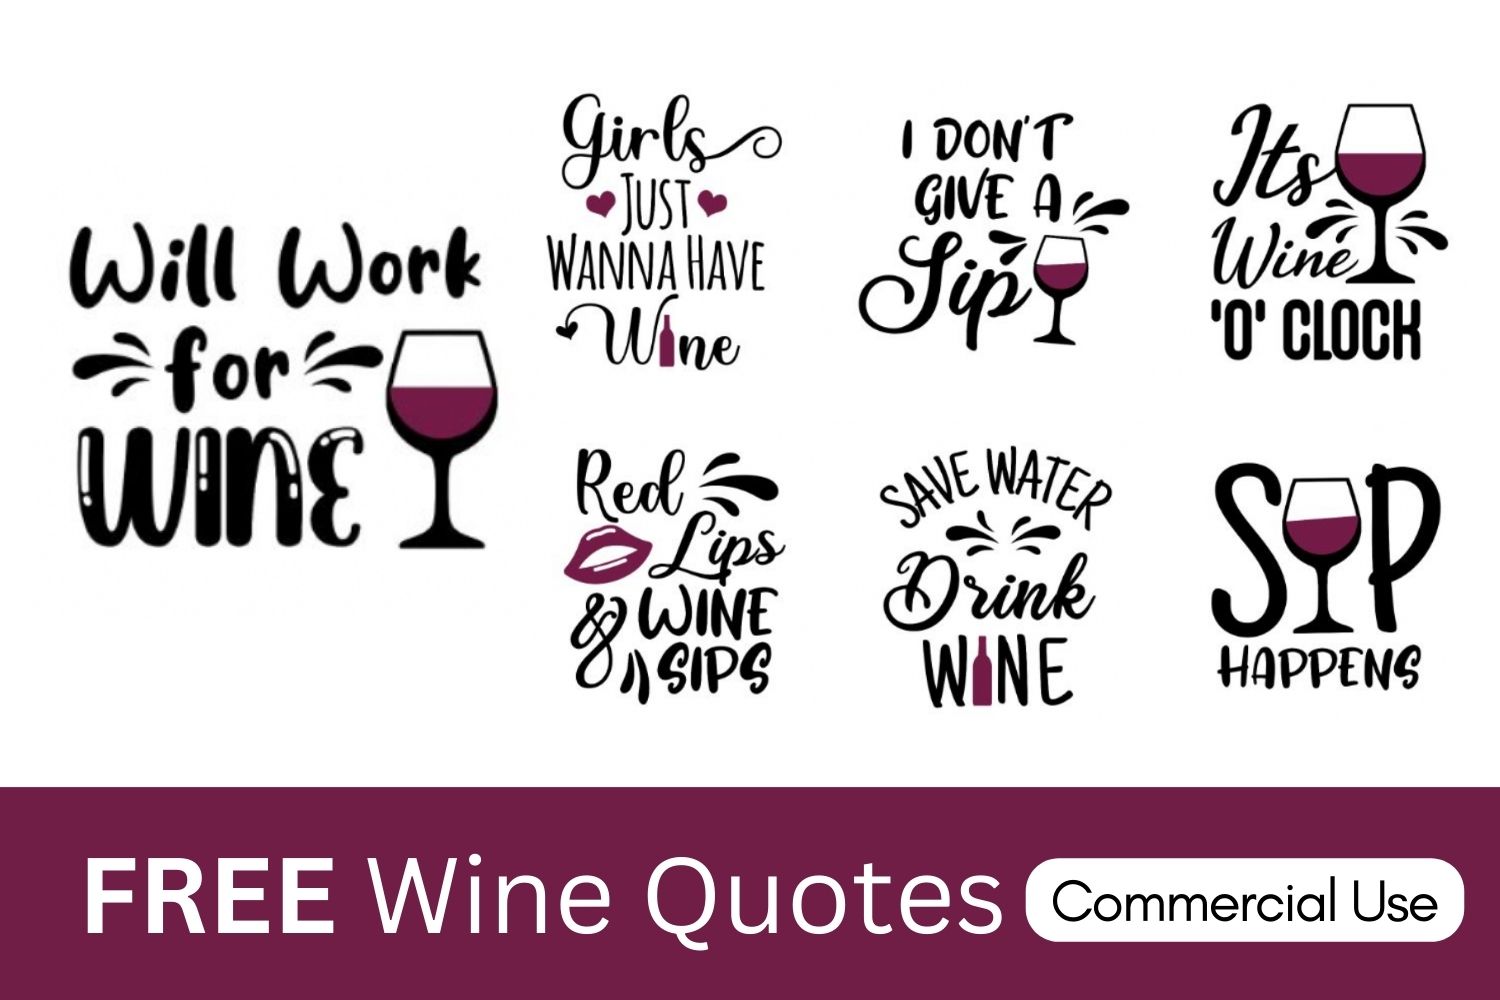 Wine Sayings and Quotes SVG cricut silhouette laser cut scroll saw layered vector free download